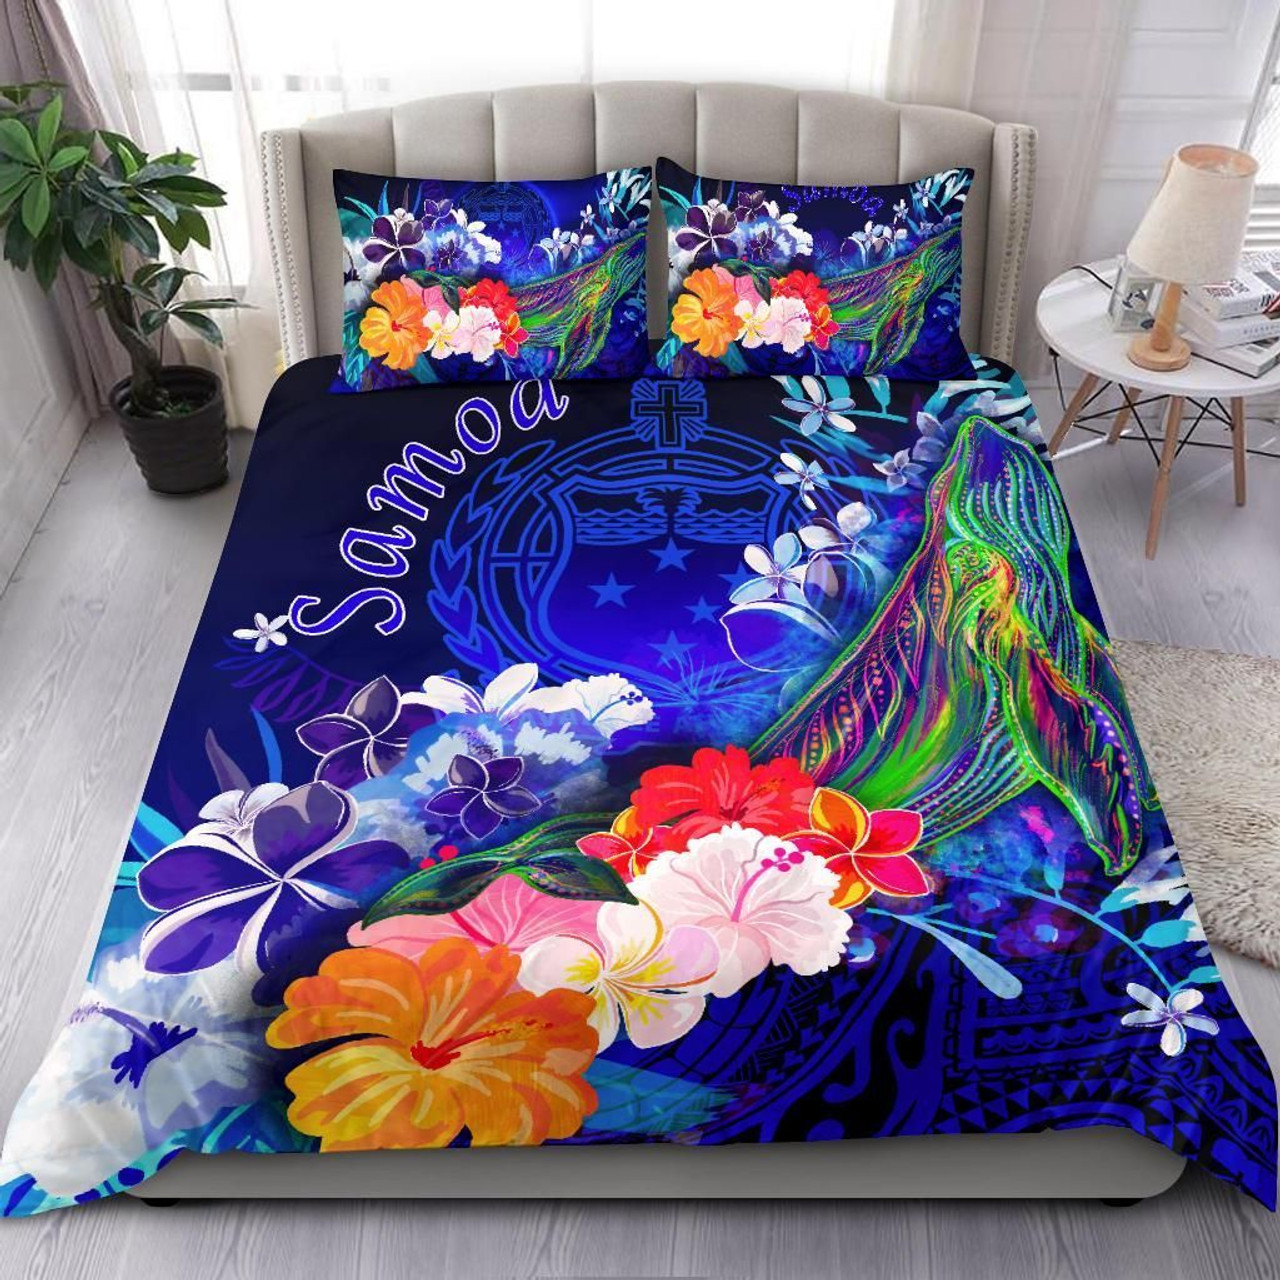 Samoa Bedding Set - Humpback Whale With Tropical Flowers (Blue) 2